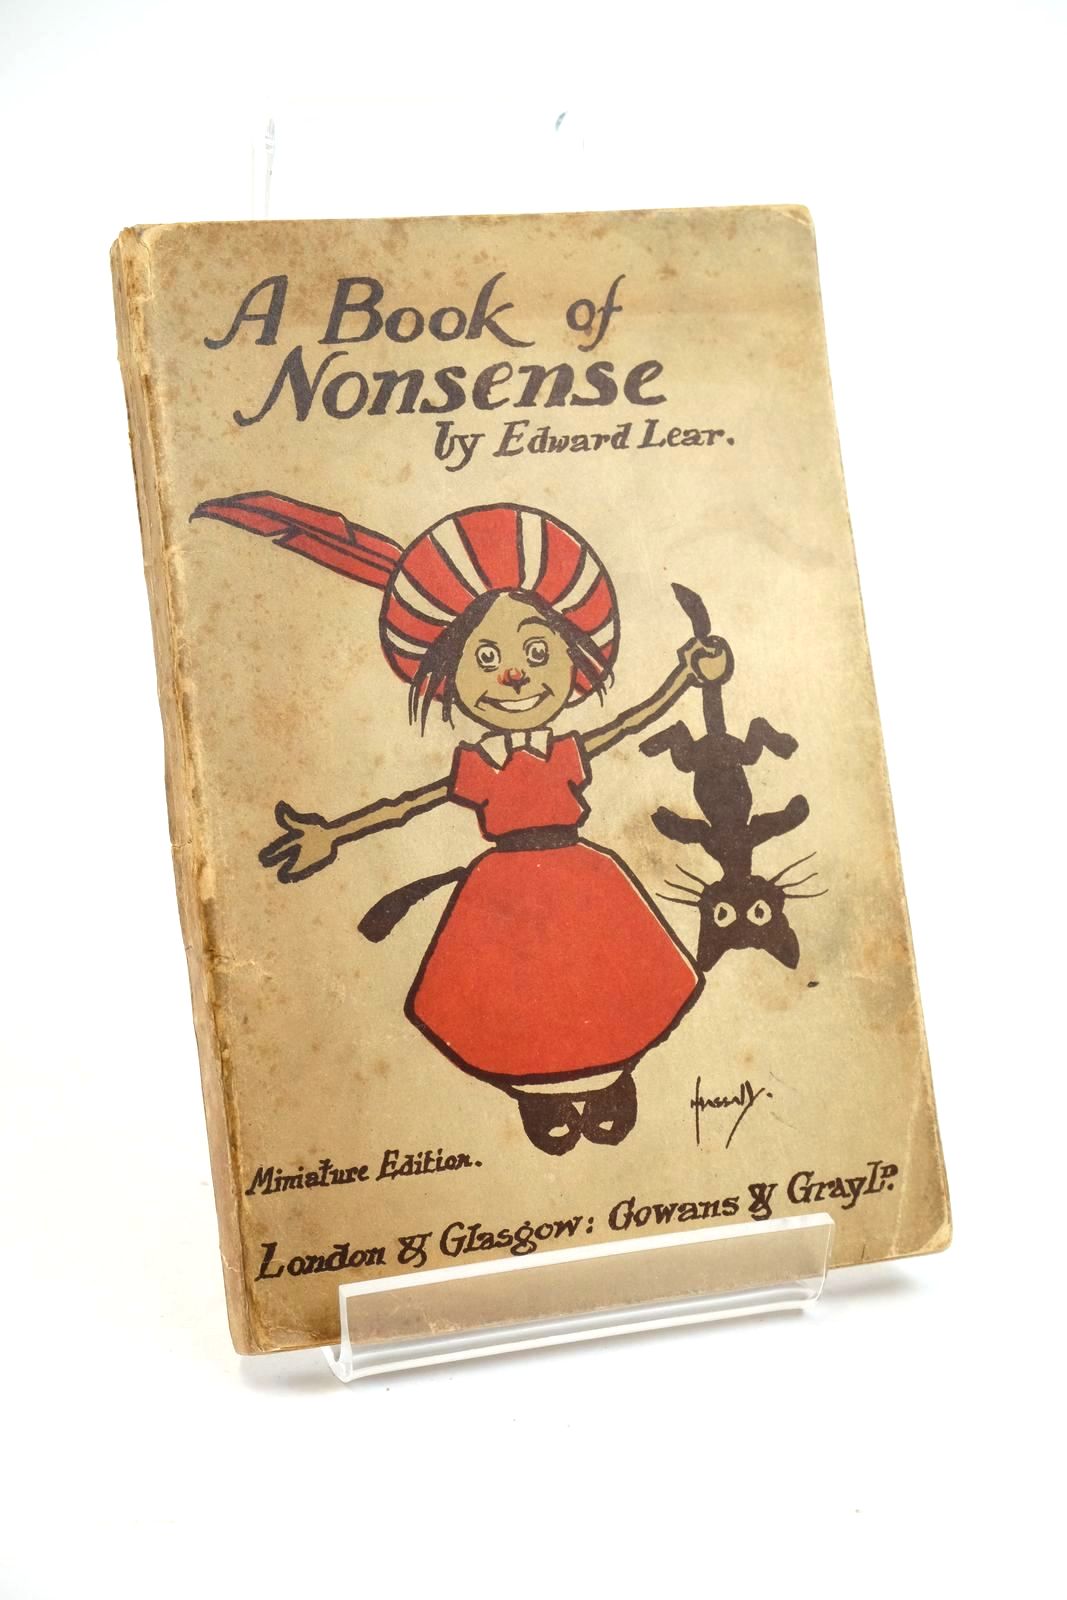 Photo of A BOOK OF NONSENSE written by Lear, Edward published by Gowans & Gray Ltd. (STOCK CODE: 1321526)  for sale by Stella & Rose's Books